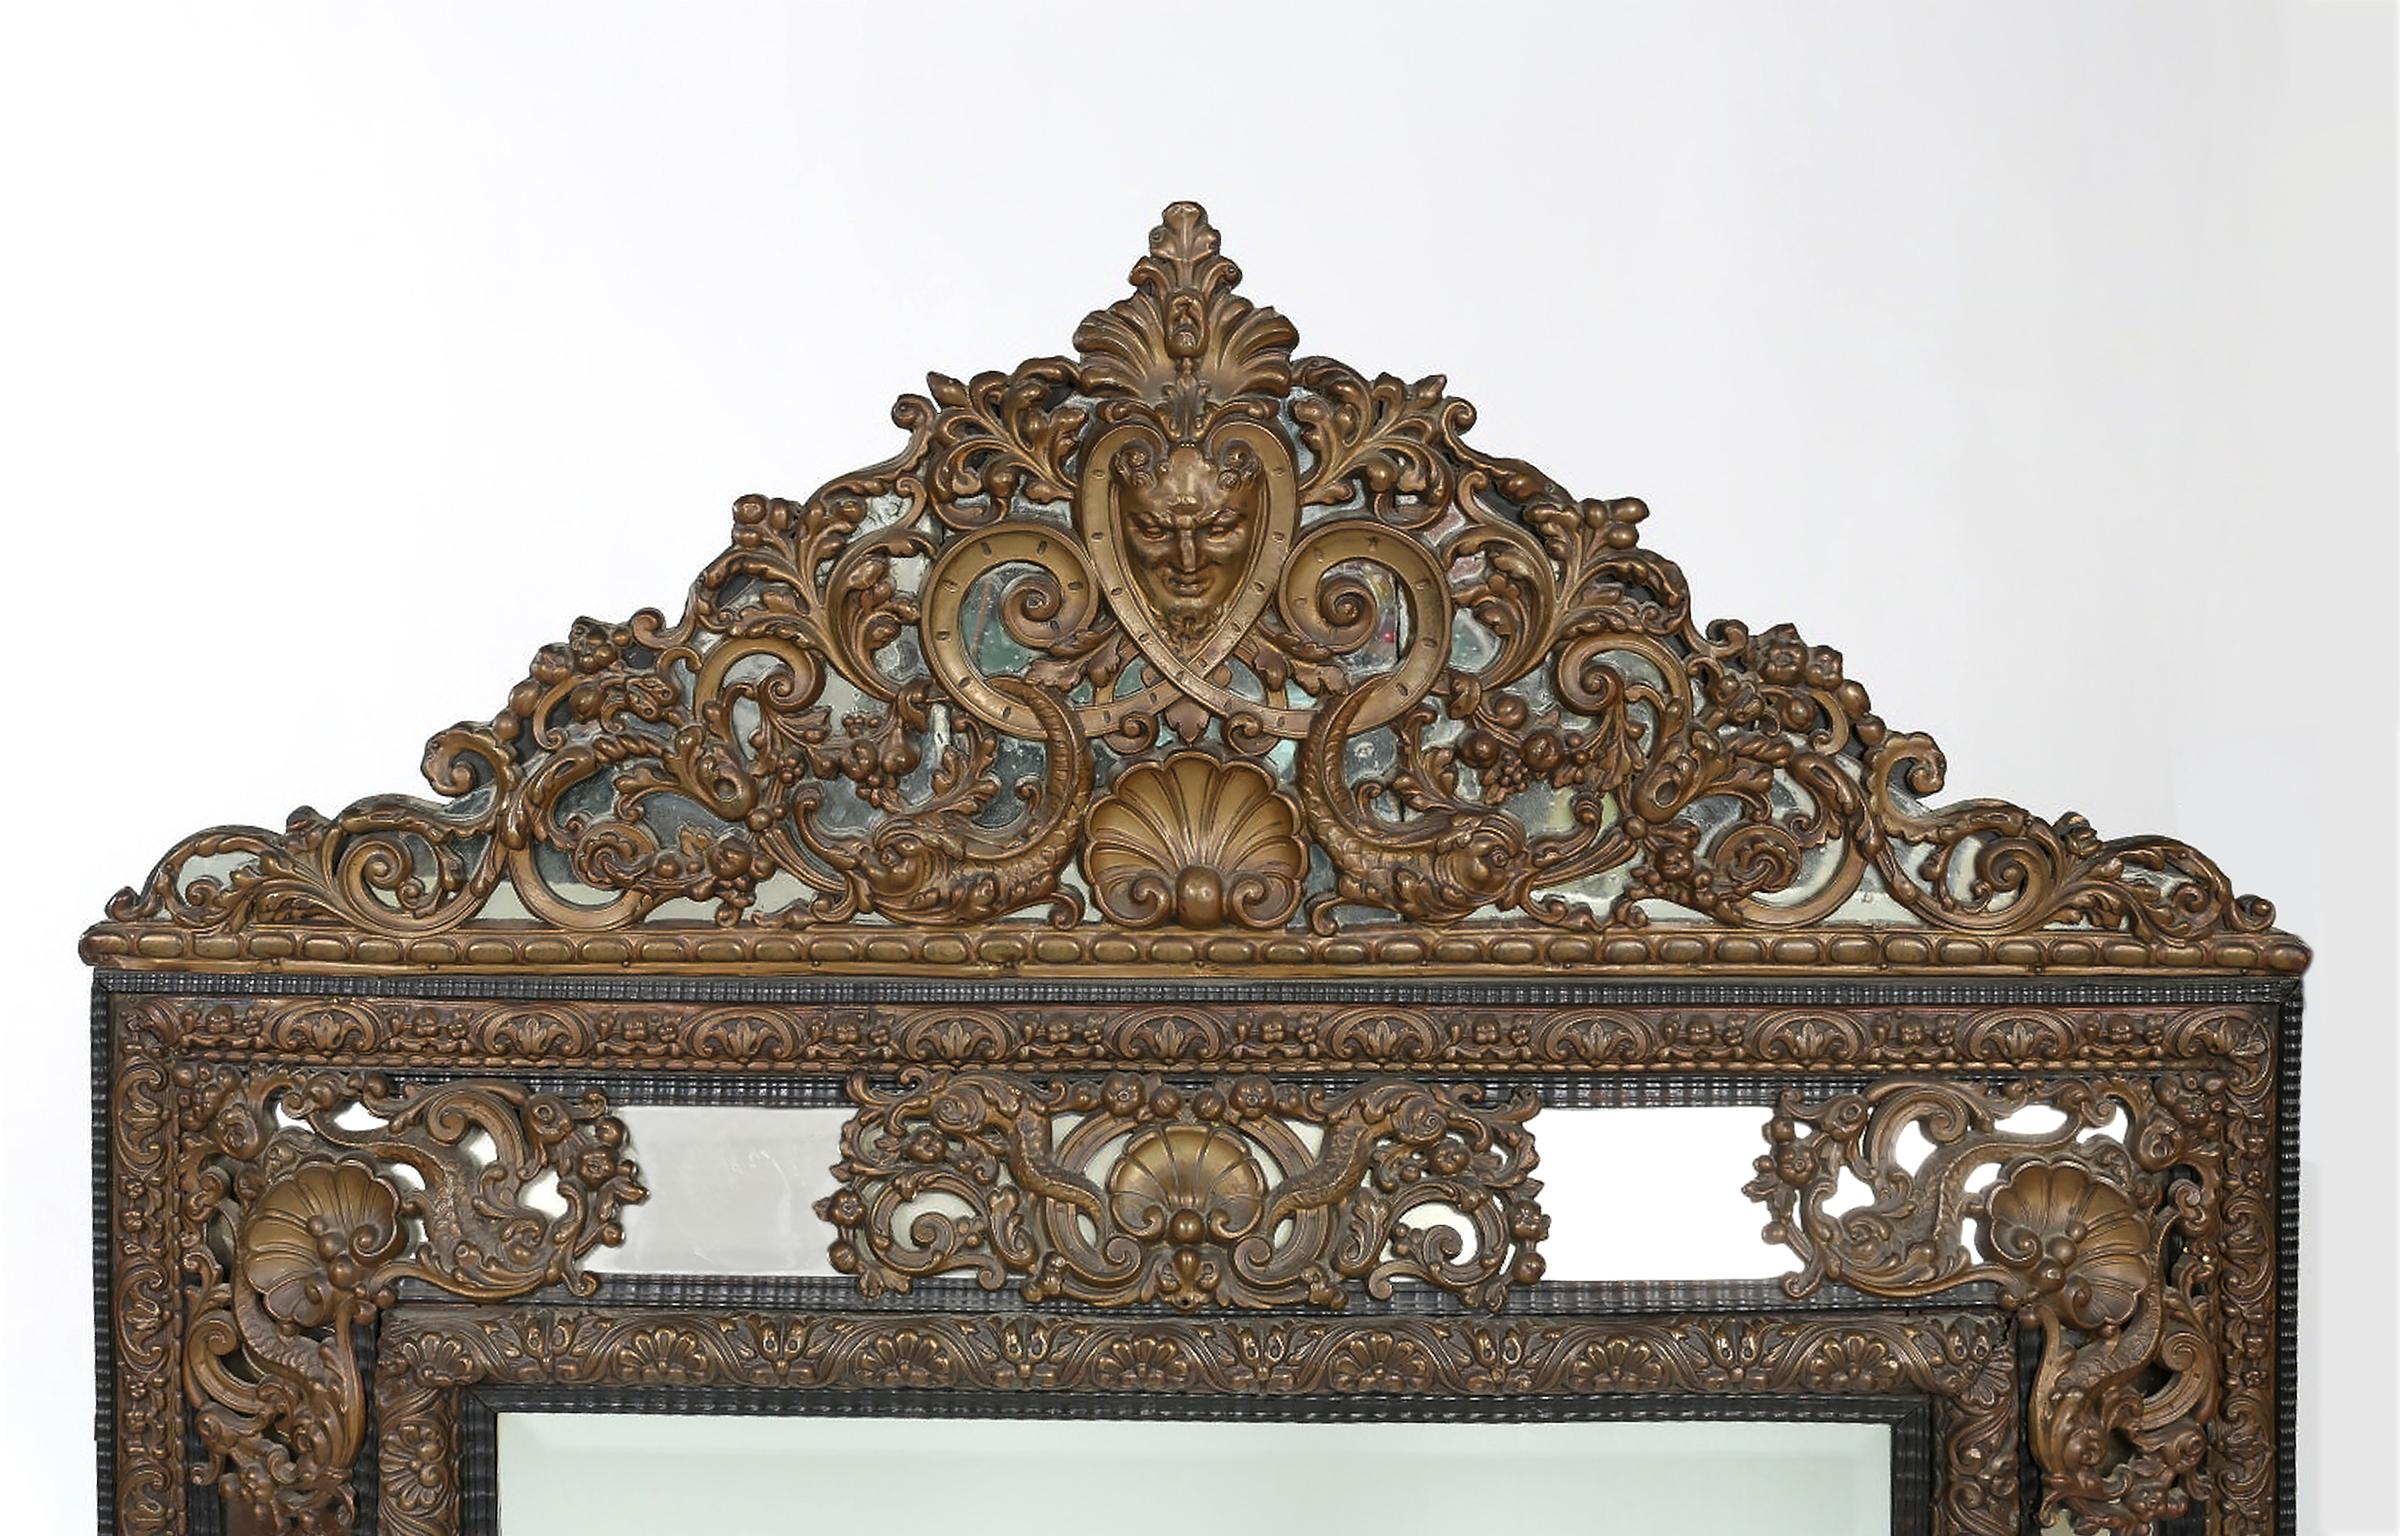 Impressive Baroque style with brass embossed beveled hanging wall mirror. The mirror is in good condition with wear appropriate to age / use. The mirror measure about 63 inches high x 40.5 inches wide.